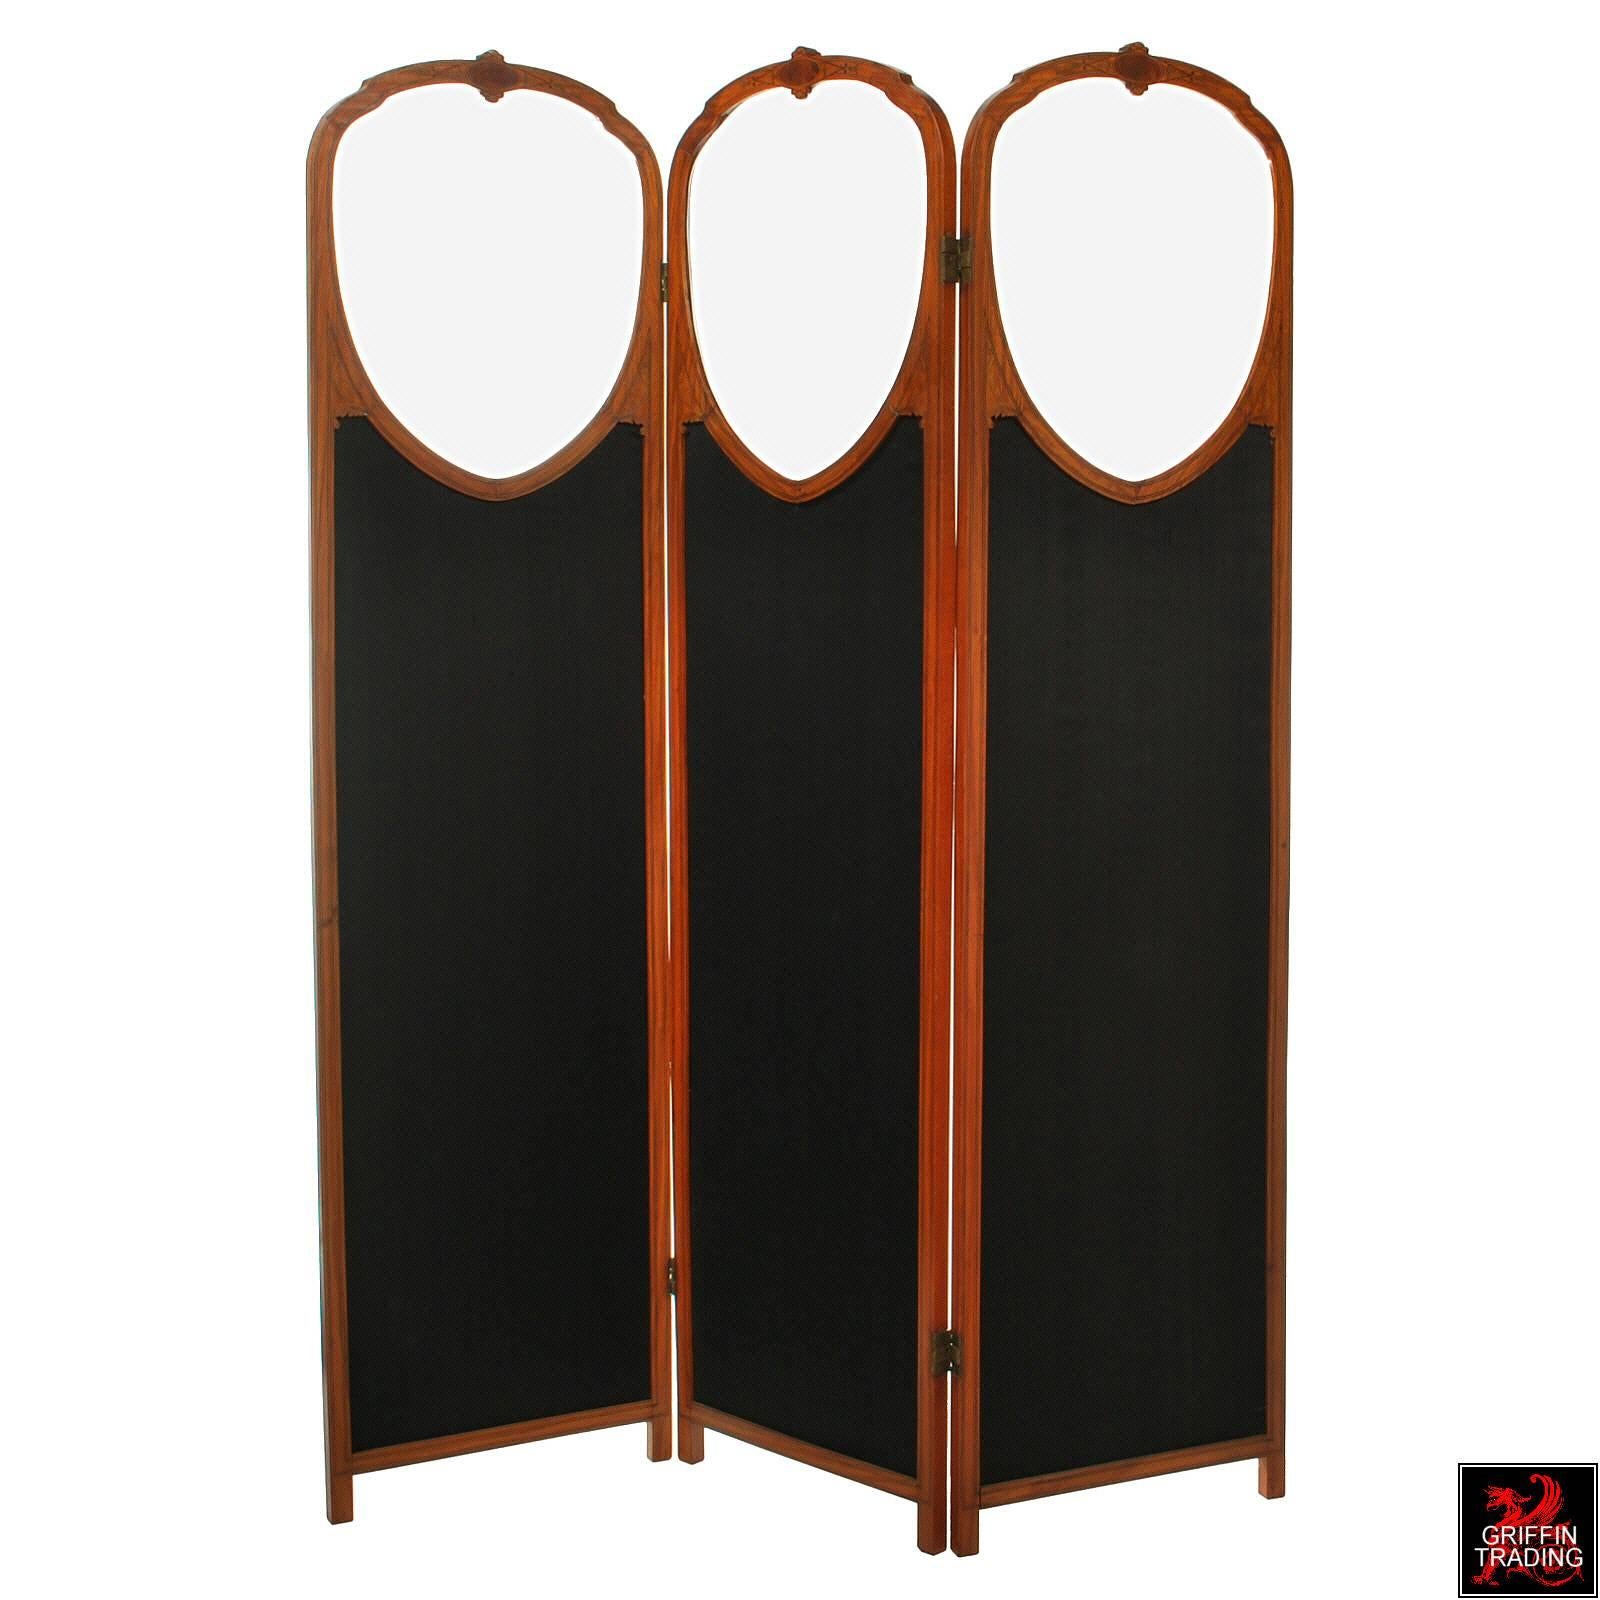 This is an exquisite English or continental satinwood three-panel screen with finely inlaid floral marquetry and ebony and boxwood stringing. Each panel is 18? wide and topped with a large shield shape framed glass panel with 1/4? wide bevel. The